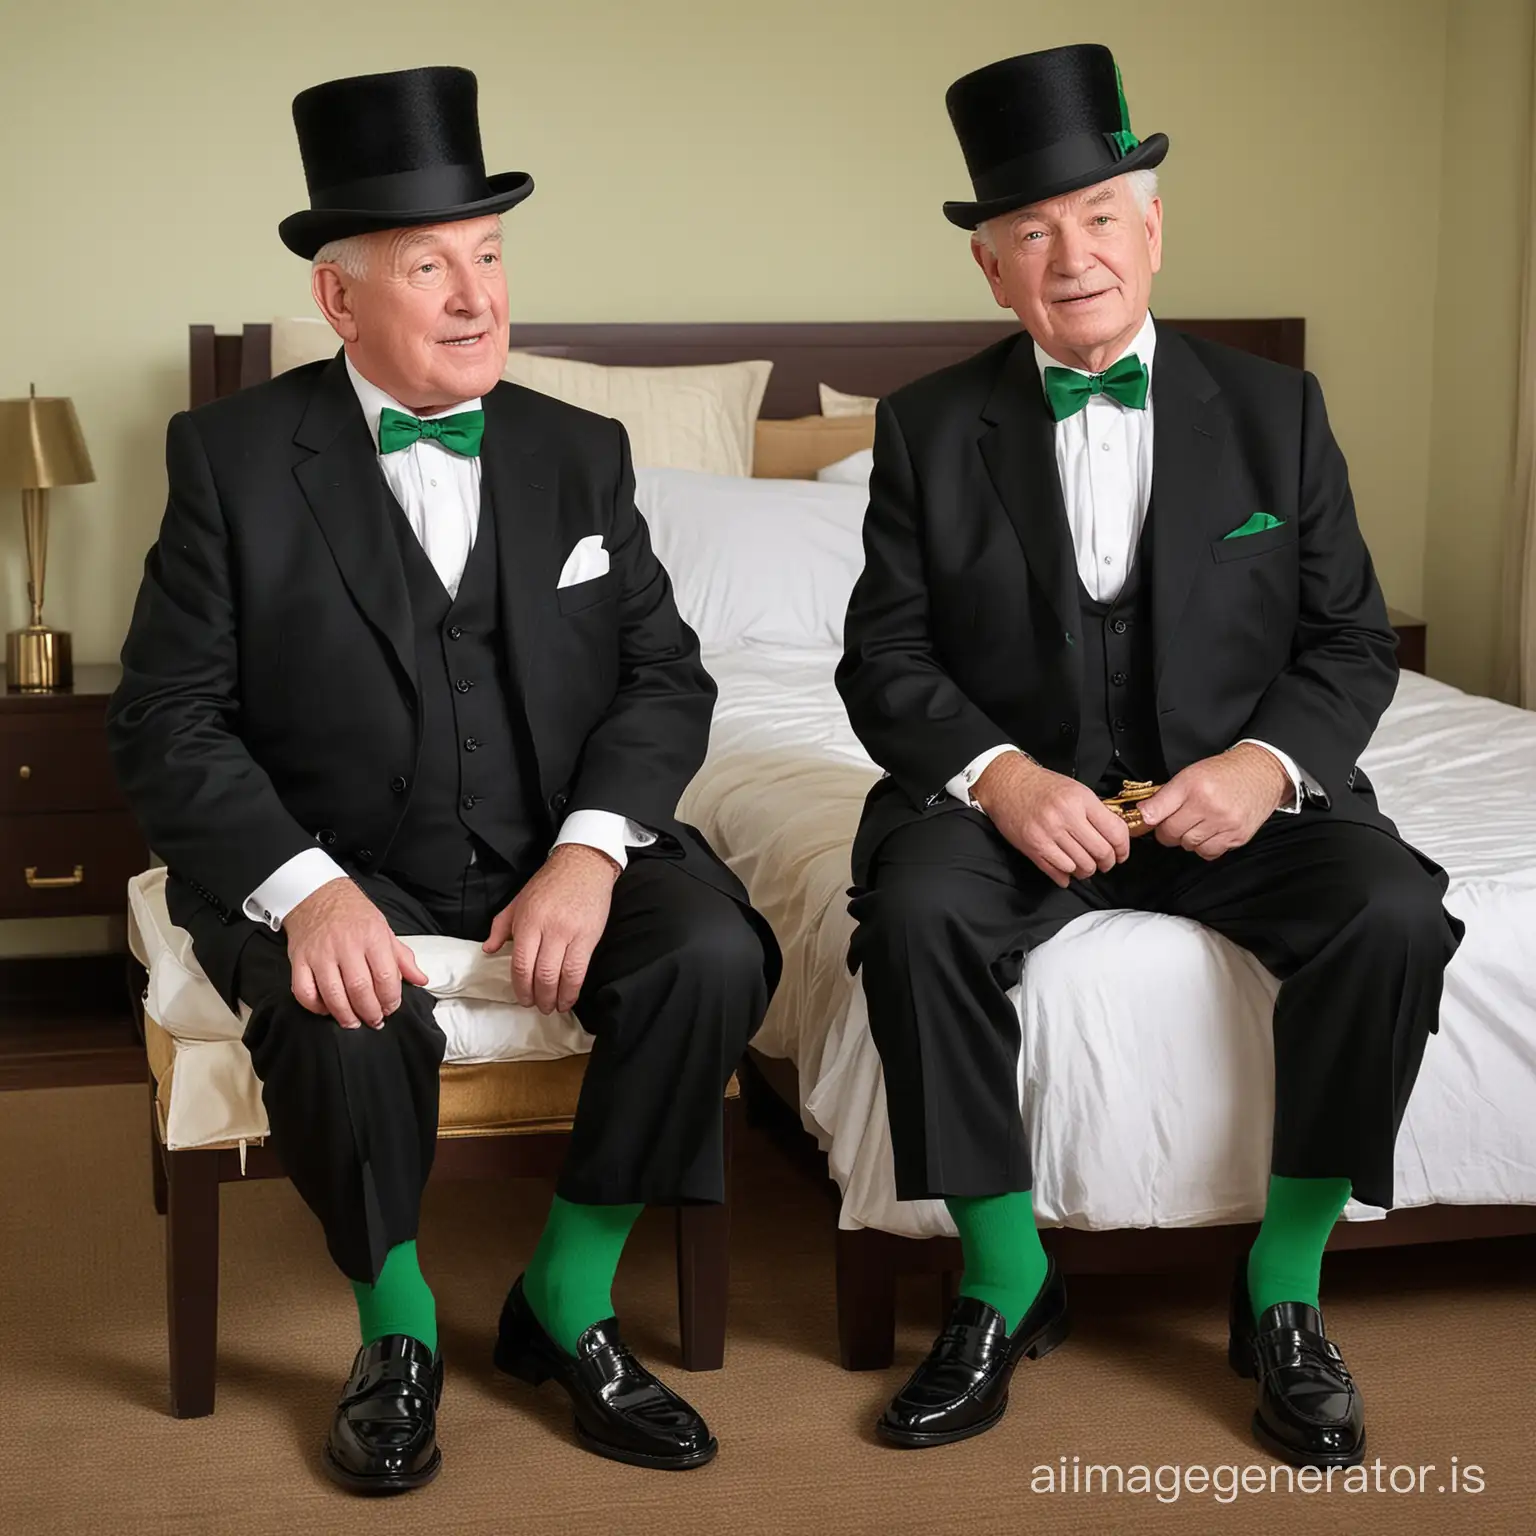 Two white fat elderly men, both 80 years old, shot height, wearing green hats, black tuxedos, green bowties, green socks, black loafers, black hair, jerking off on a chair in the bedroom, full body shot, must show face